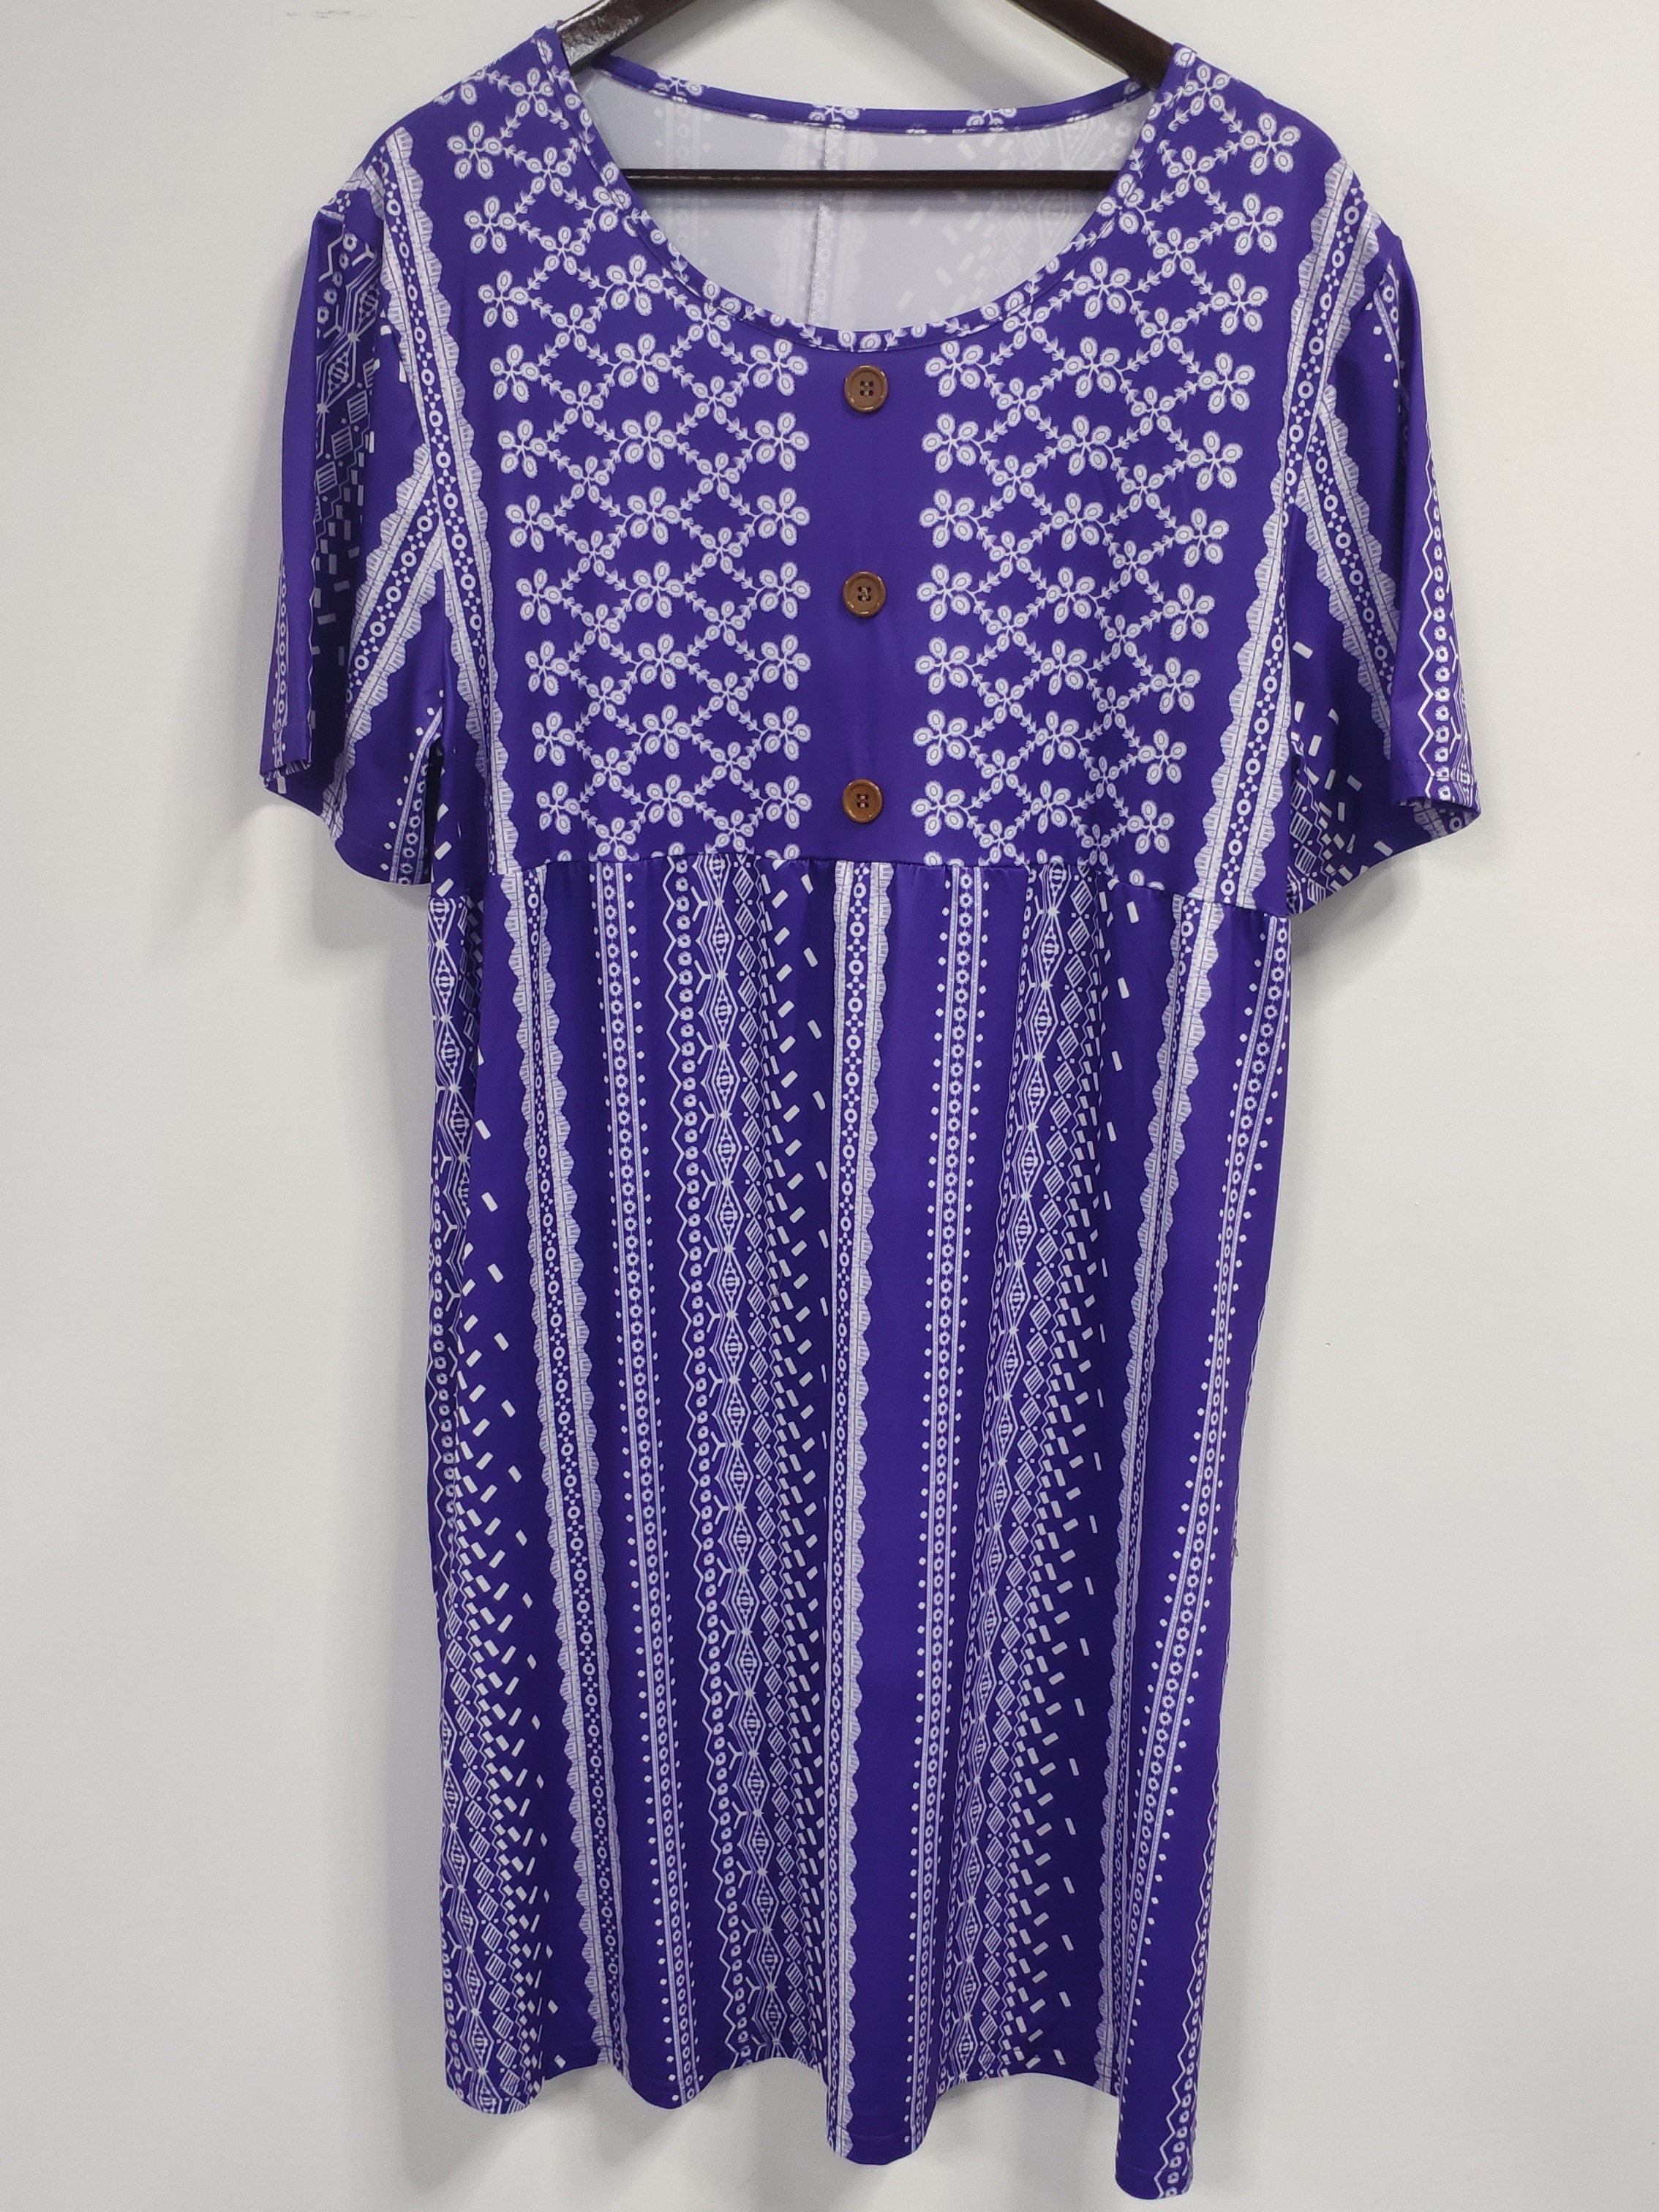 Dropship Size Boho Dress; Women's Geometric Print Short Sleeve Slight  Stretch Tee Dress With Pockets to Sell Online at a Lower Price